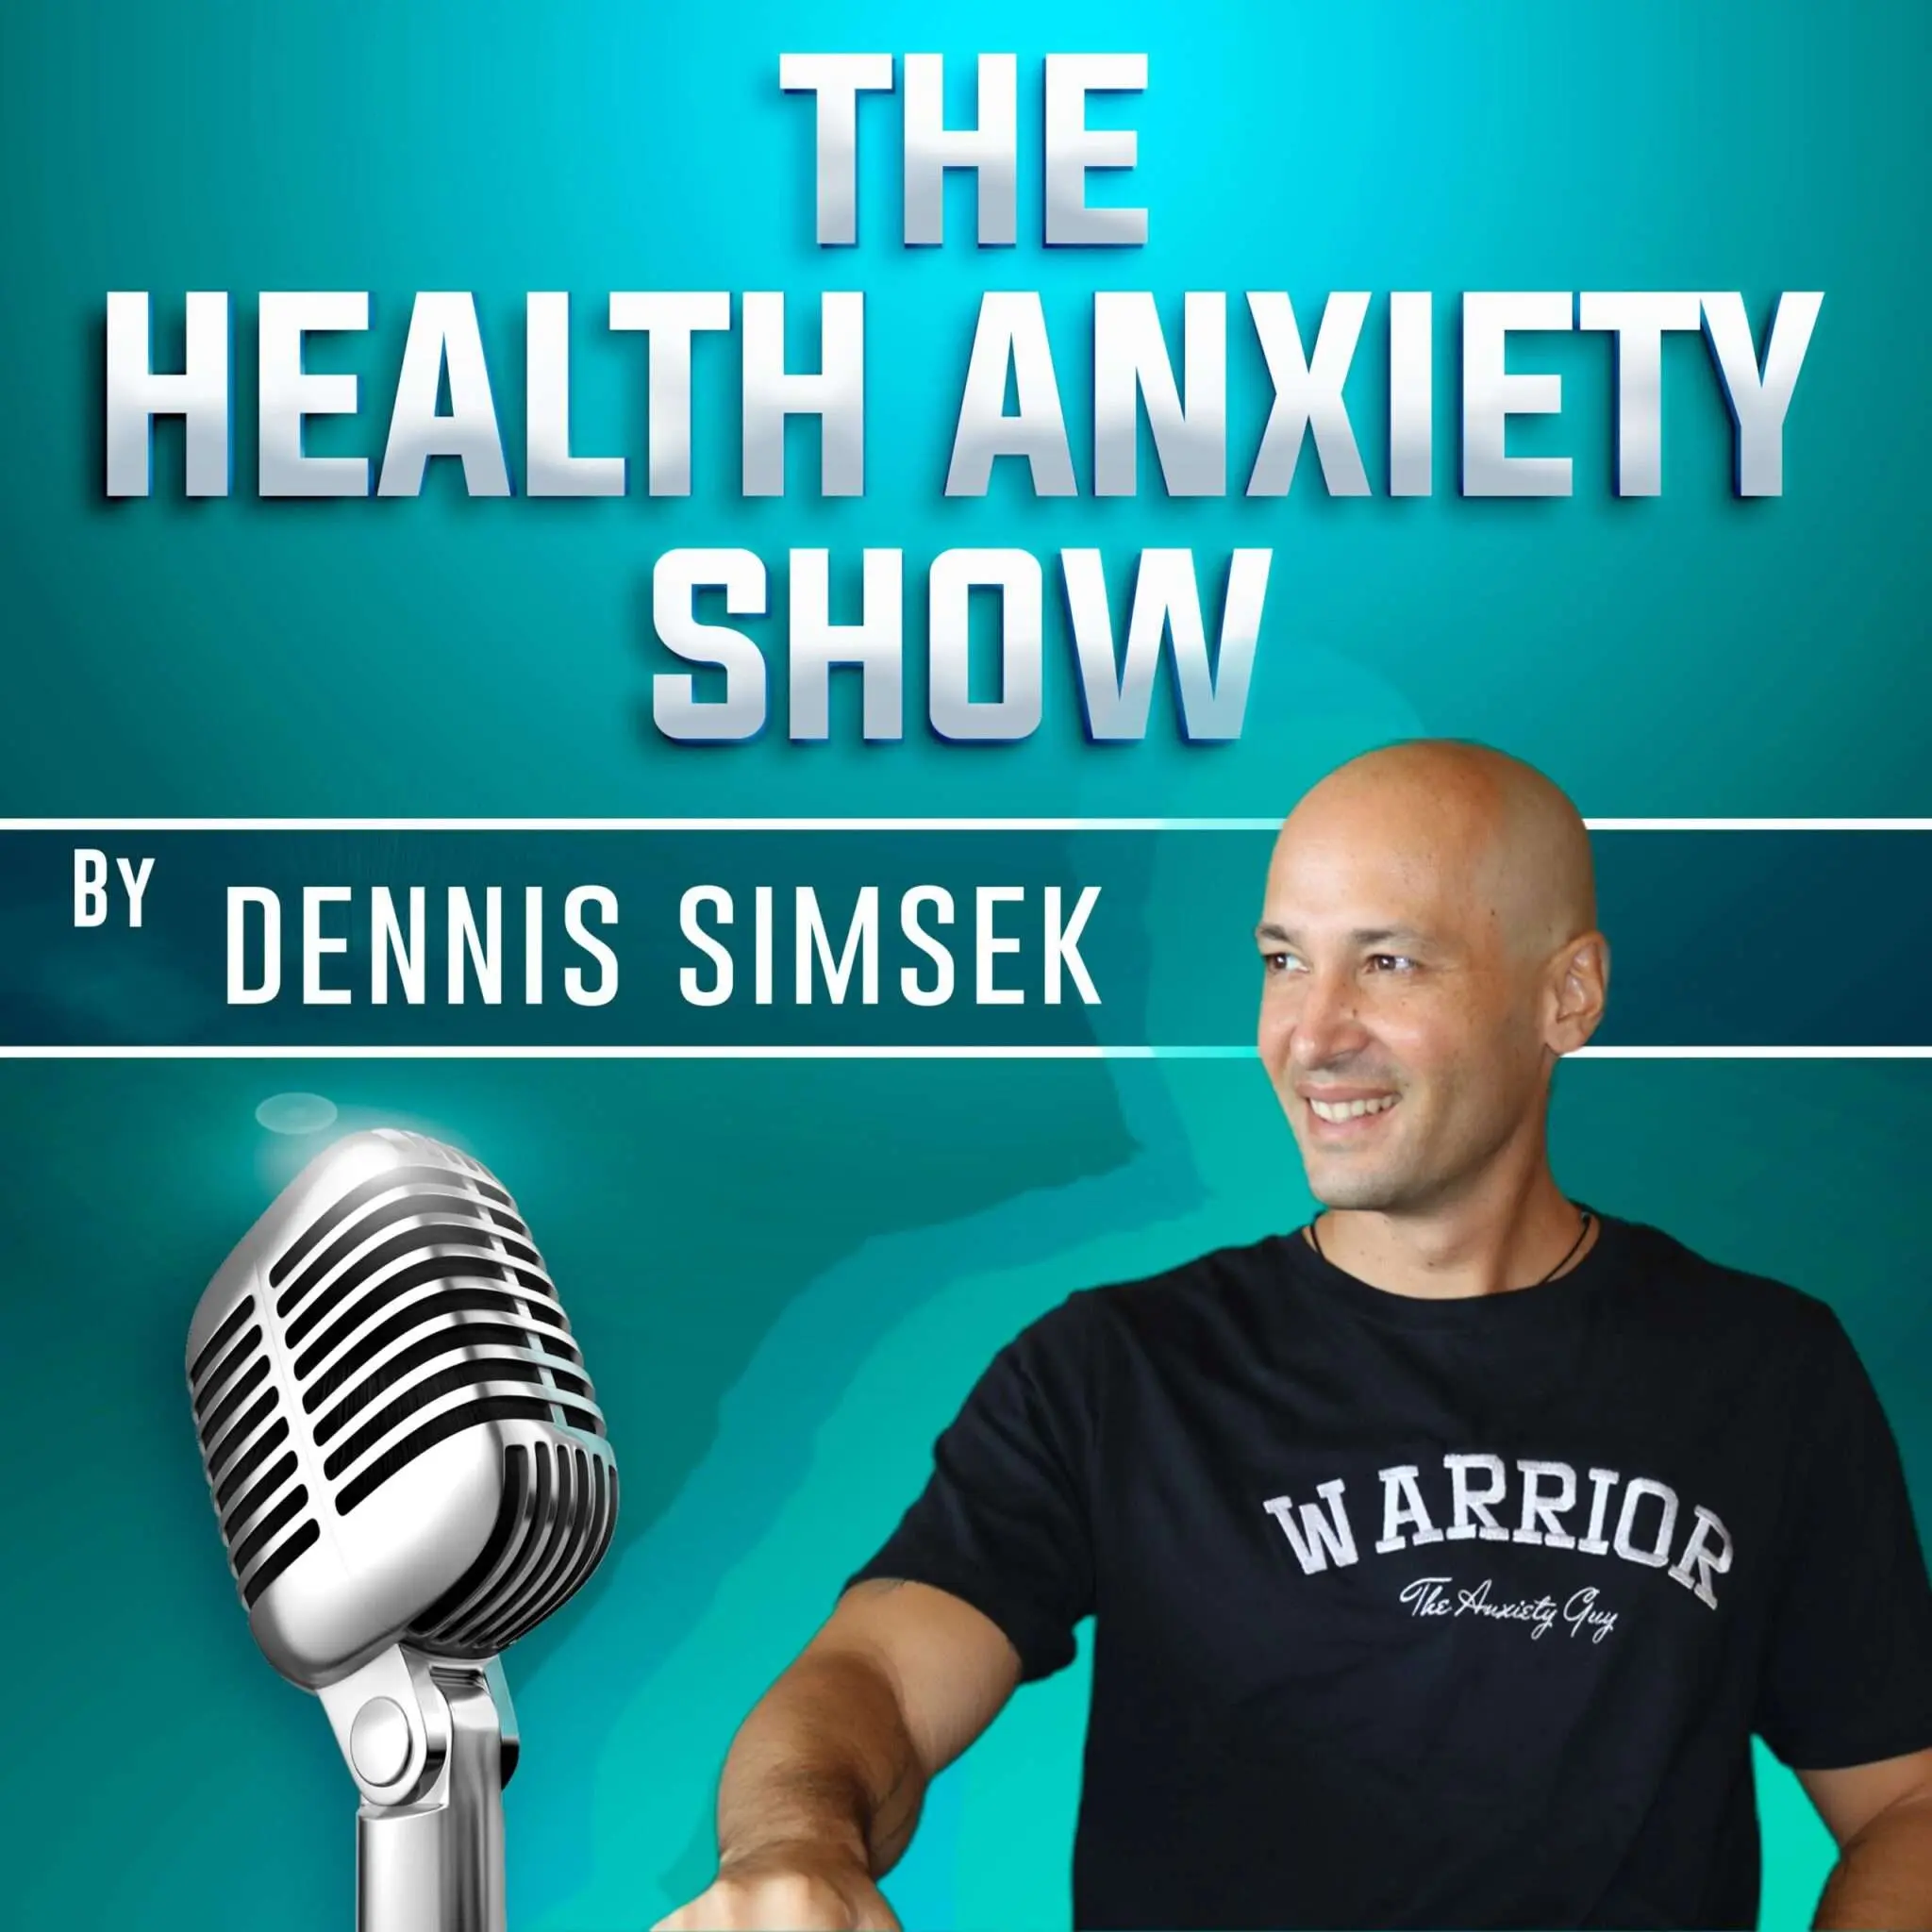 The Amygdala and Health Anxiety: Understanding the Fear Response